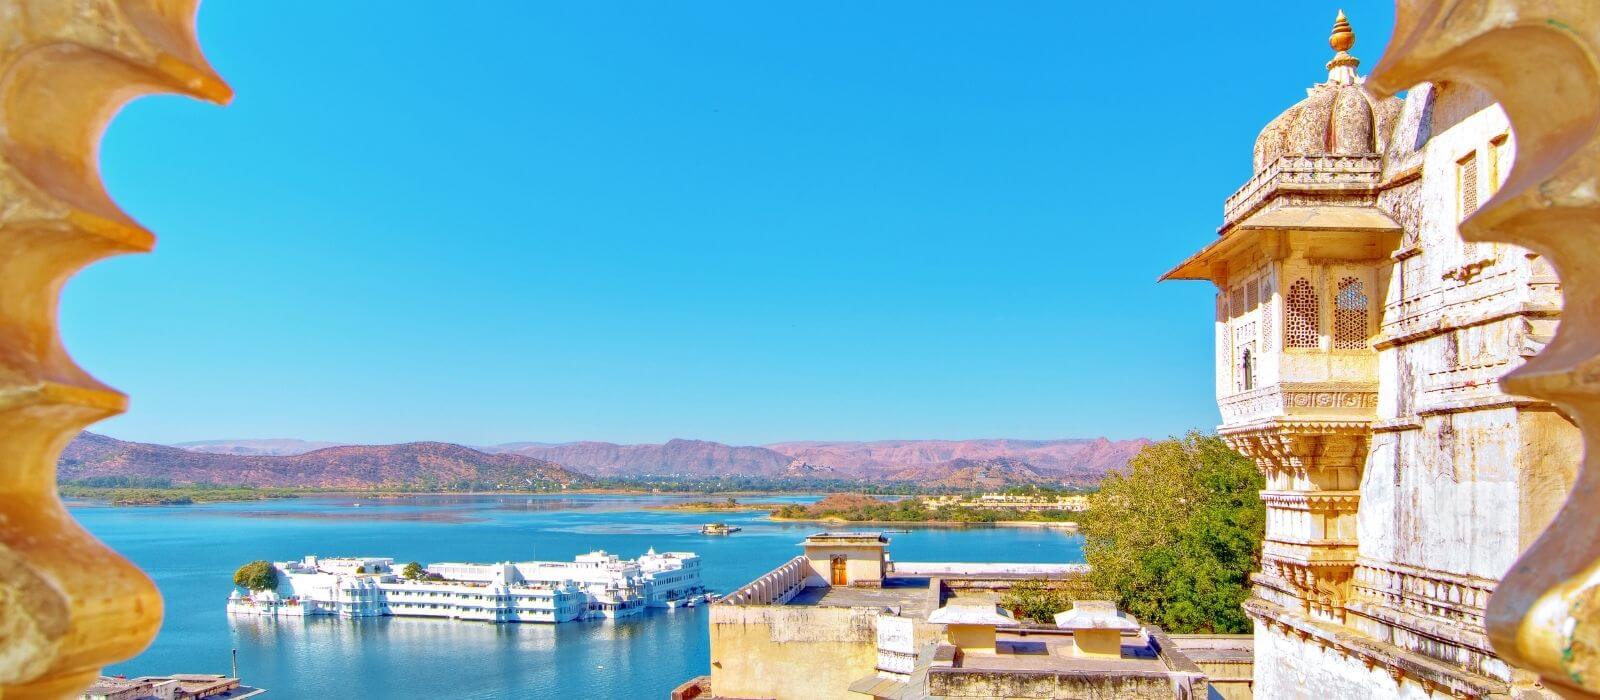 Luxury Vacation in India in Udaipur